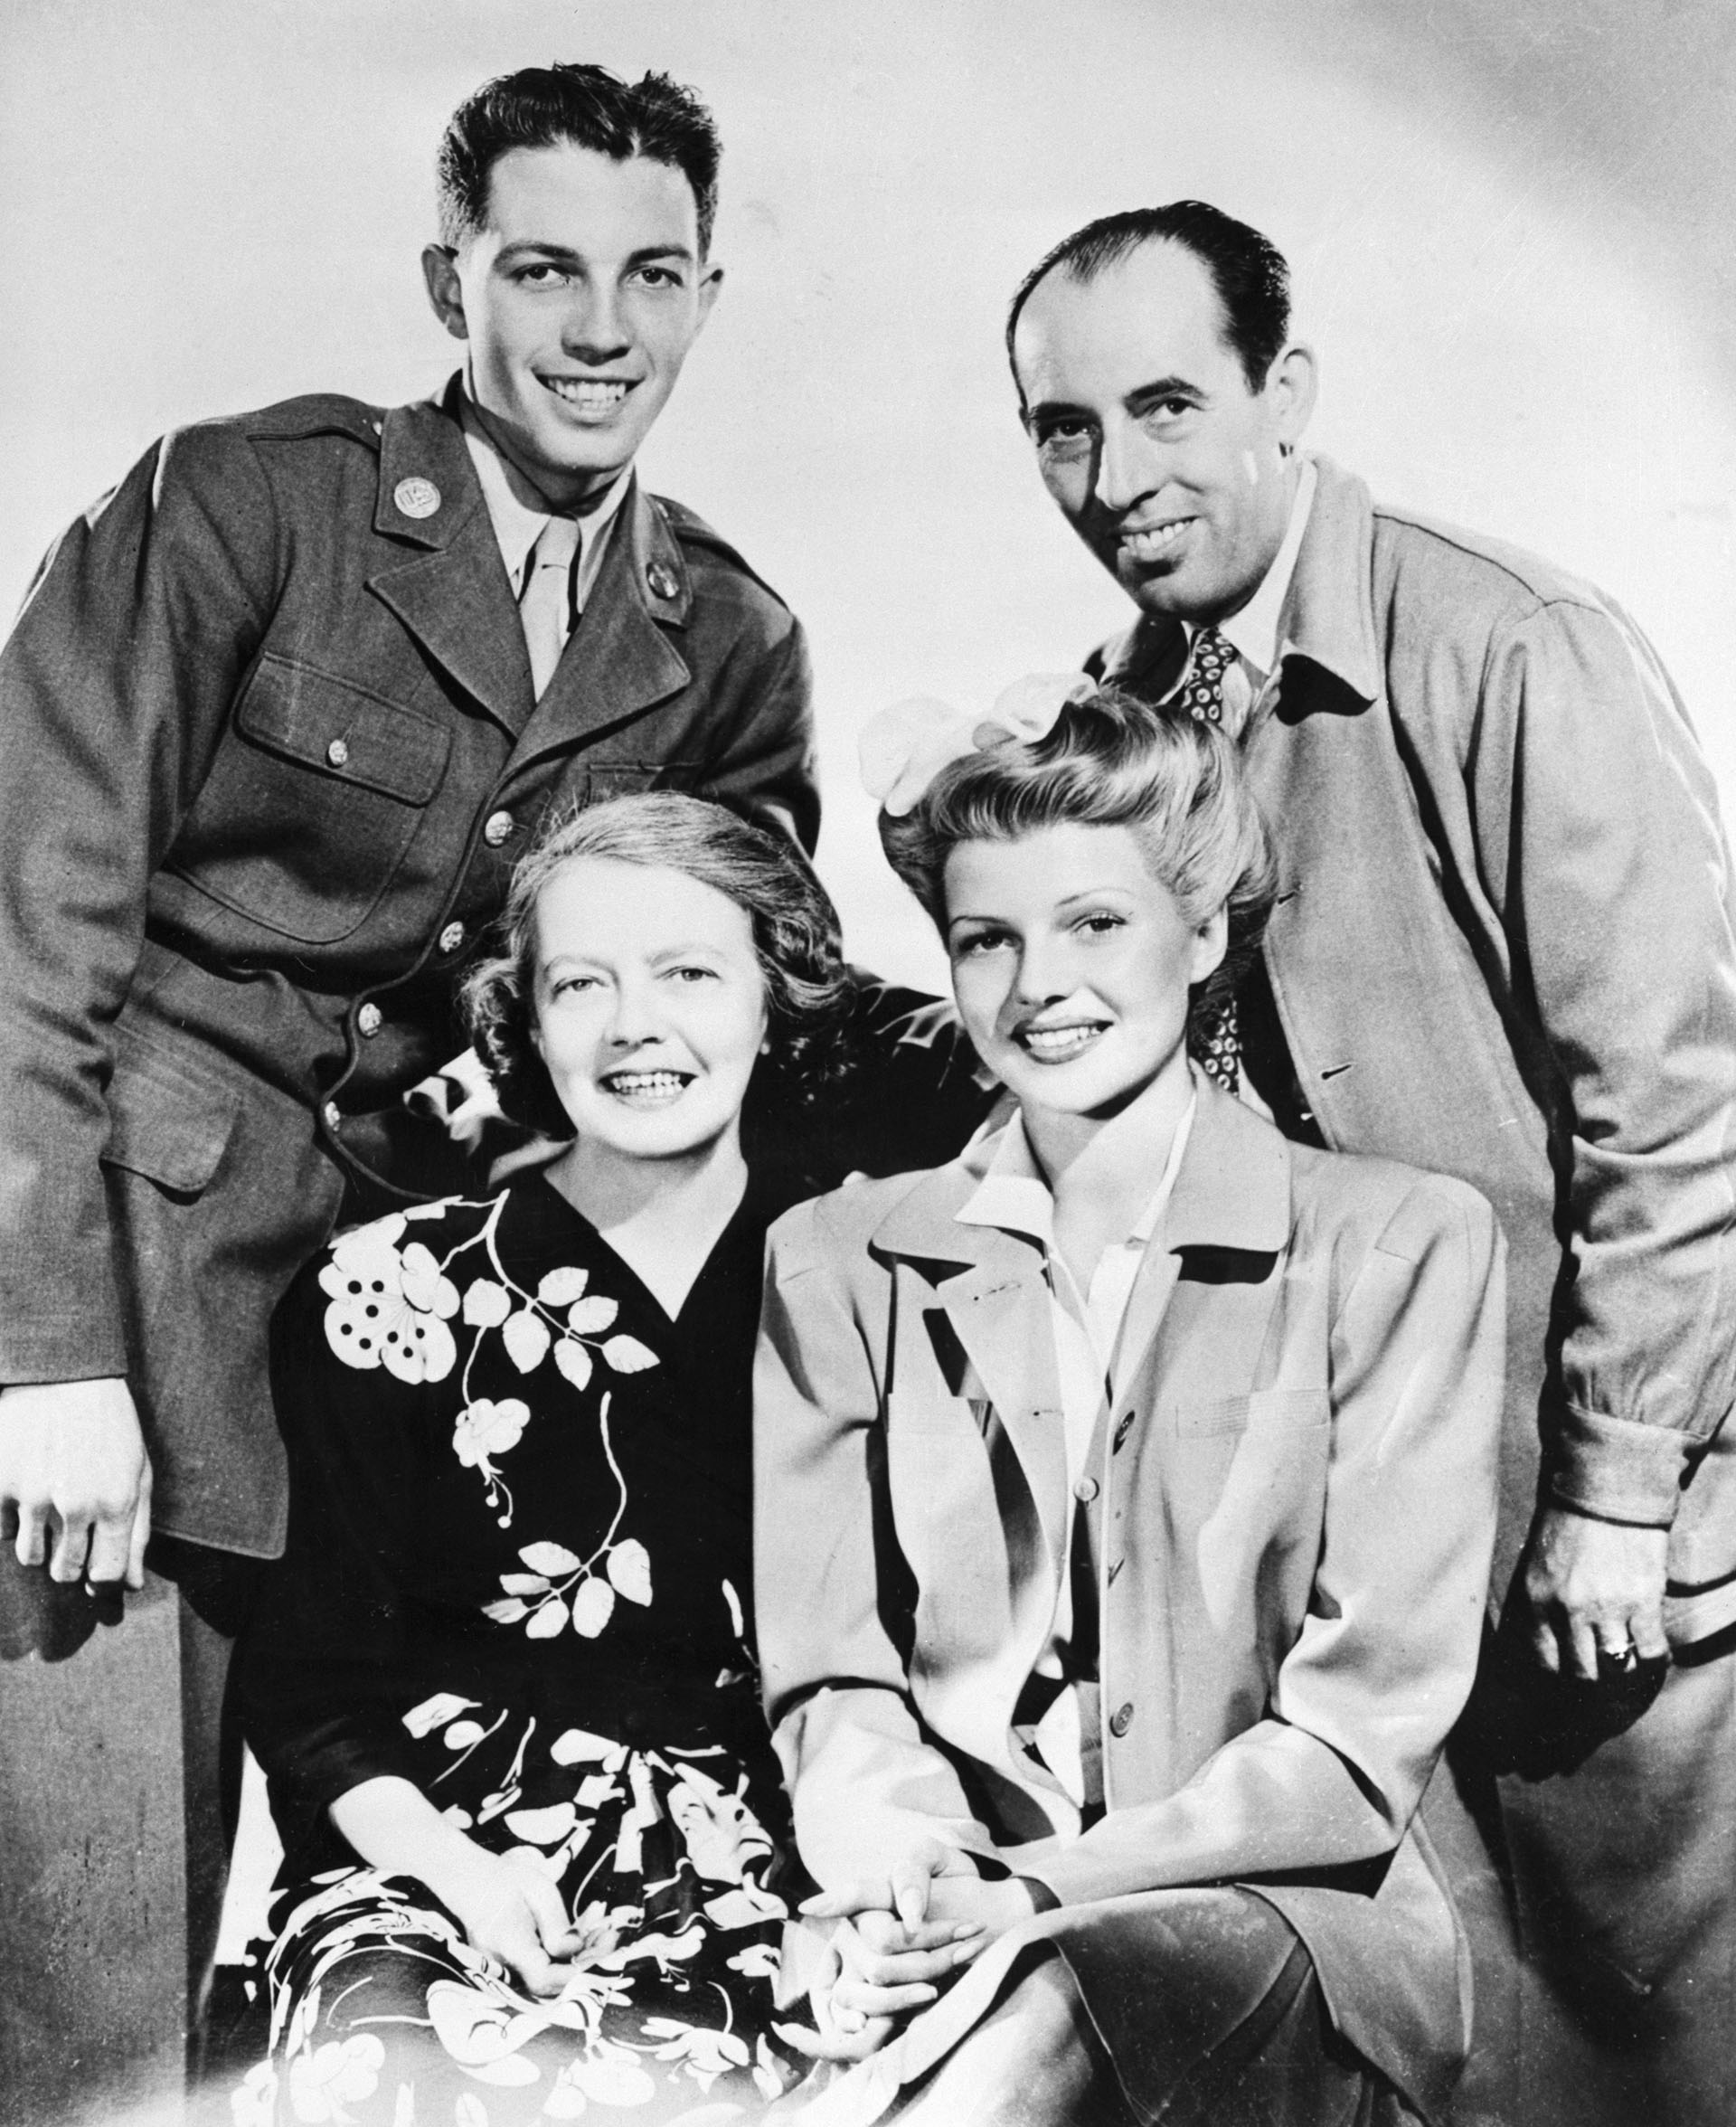 Rita Hayworth with her family: her mother Volga Hayworth, her father Eduardo Cansino and her brother (Bettmann Archive)